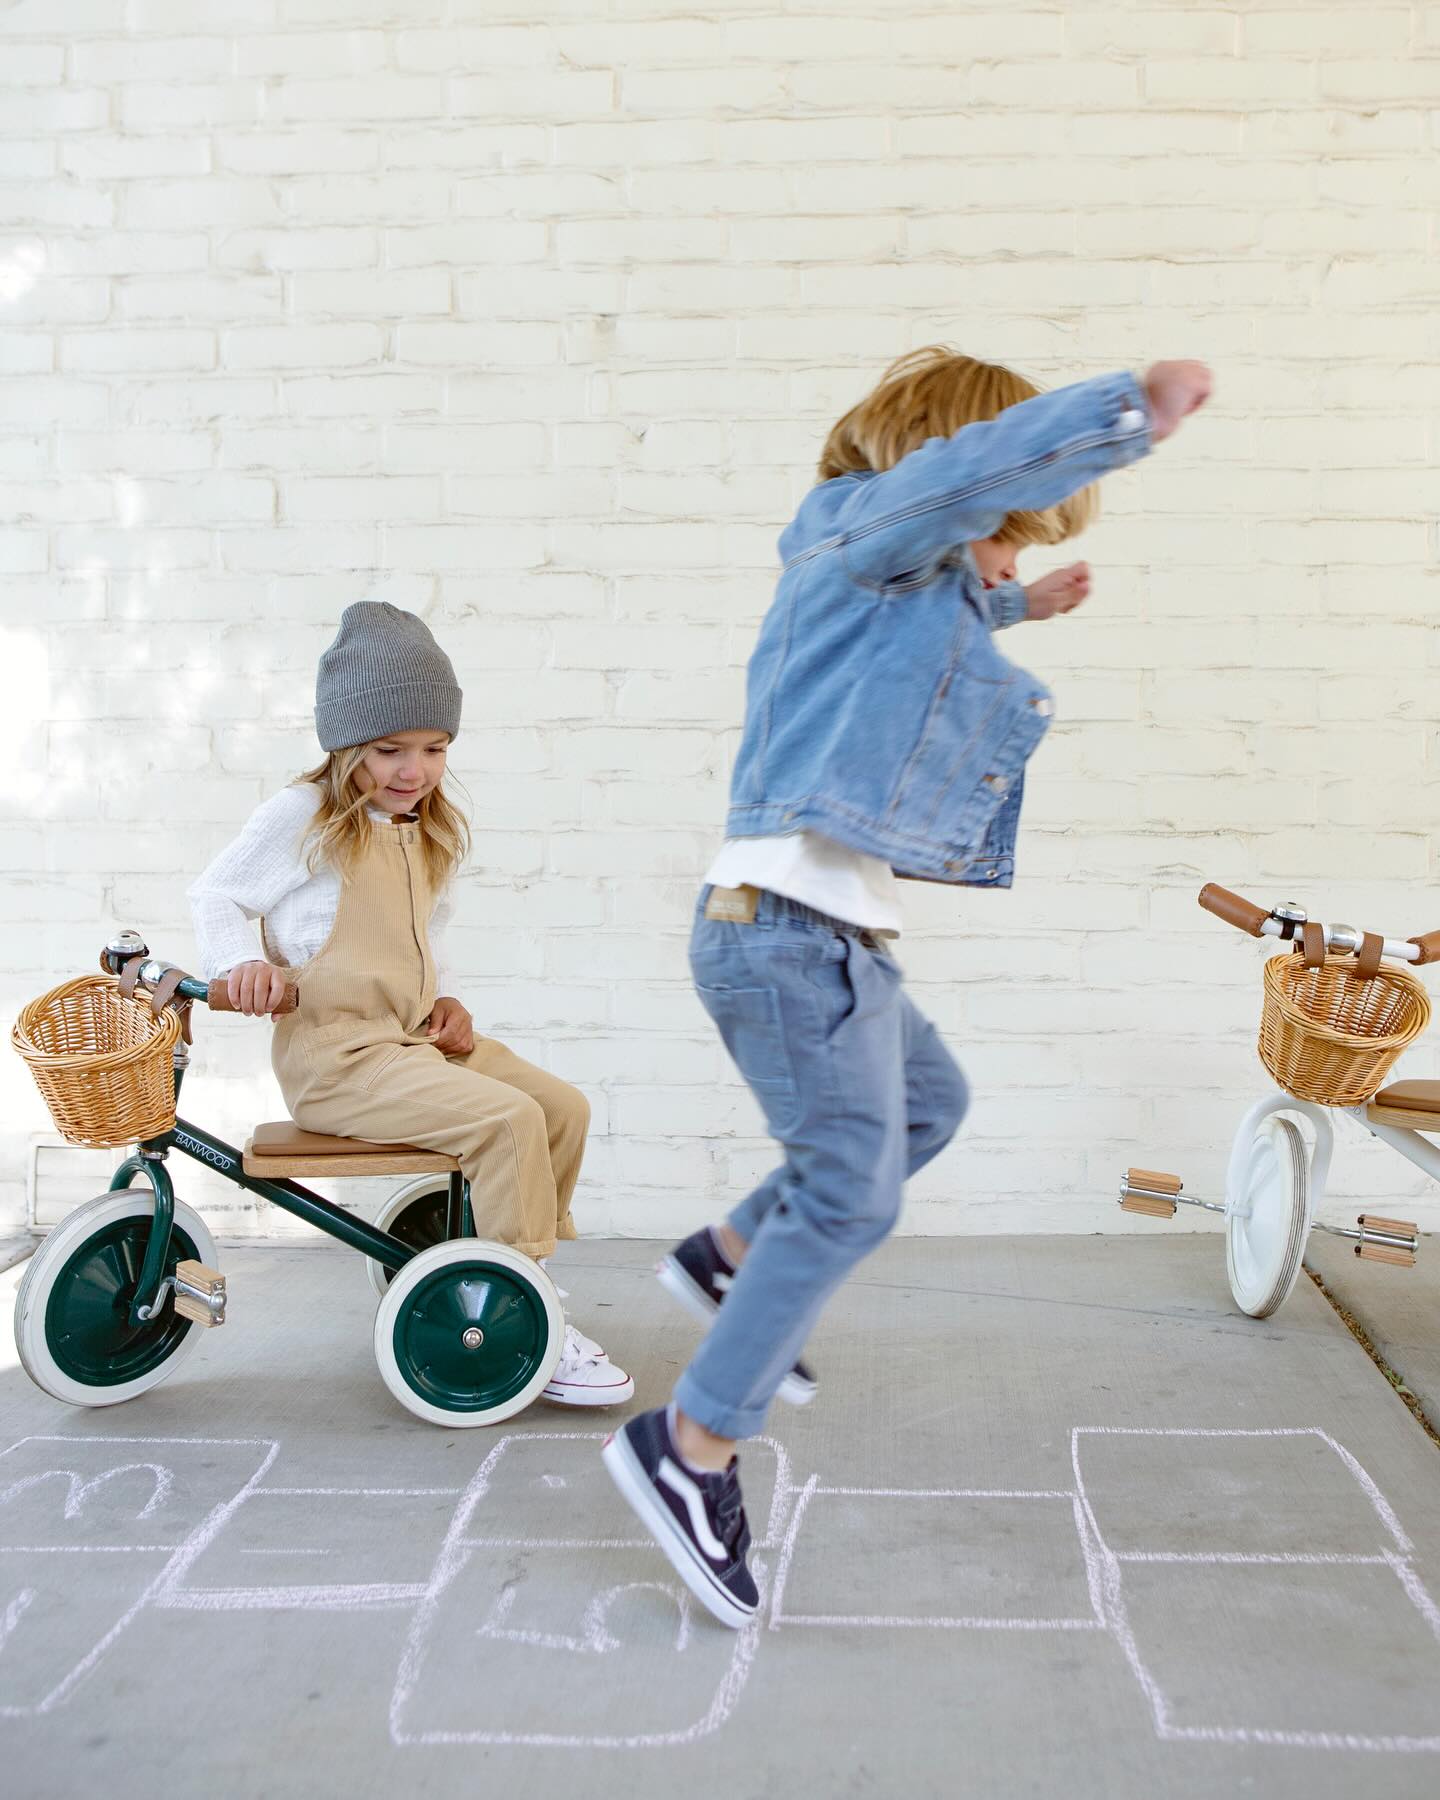 Play-date on a TrikeProducts: Trike in Green & WhiteShop now at #banwood.com